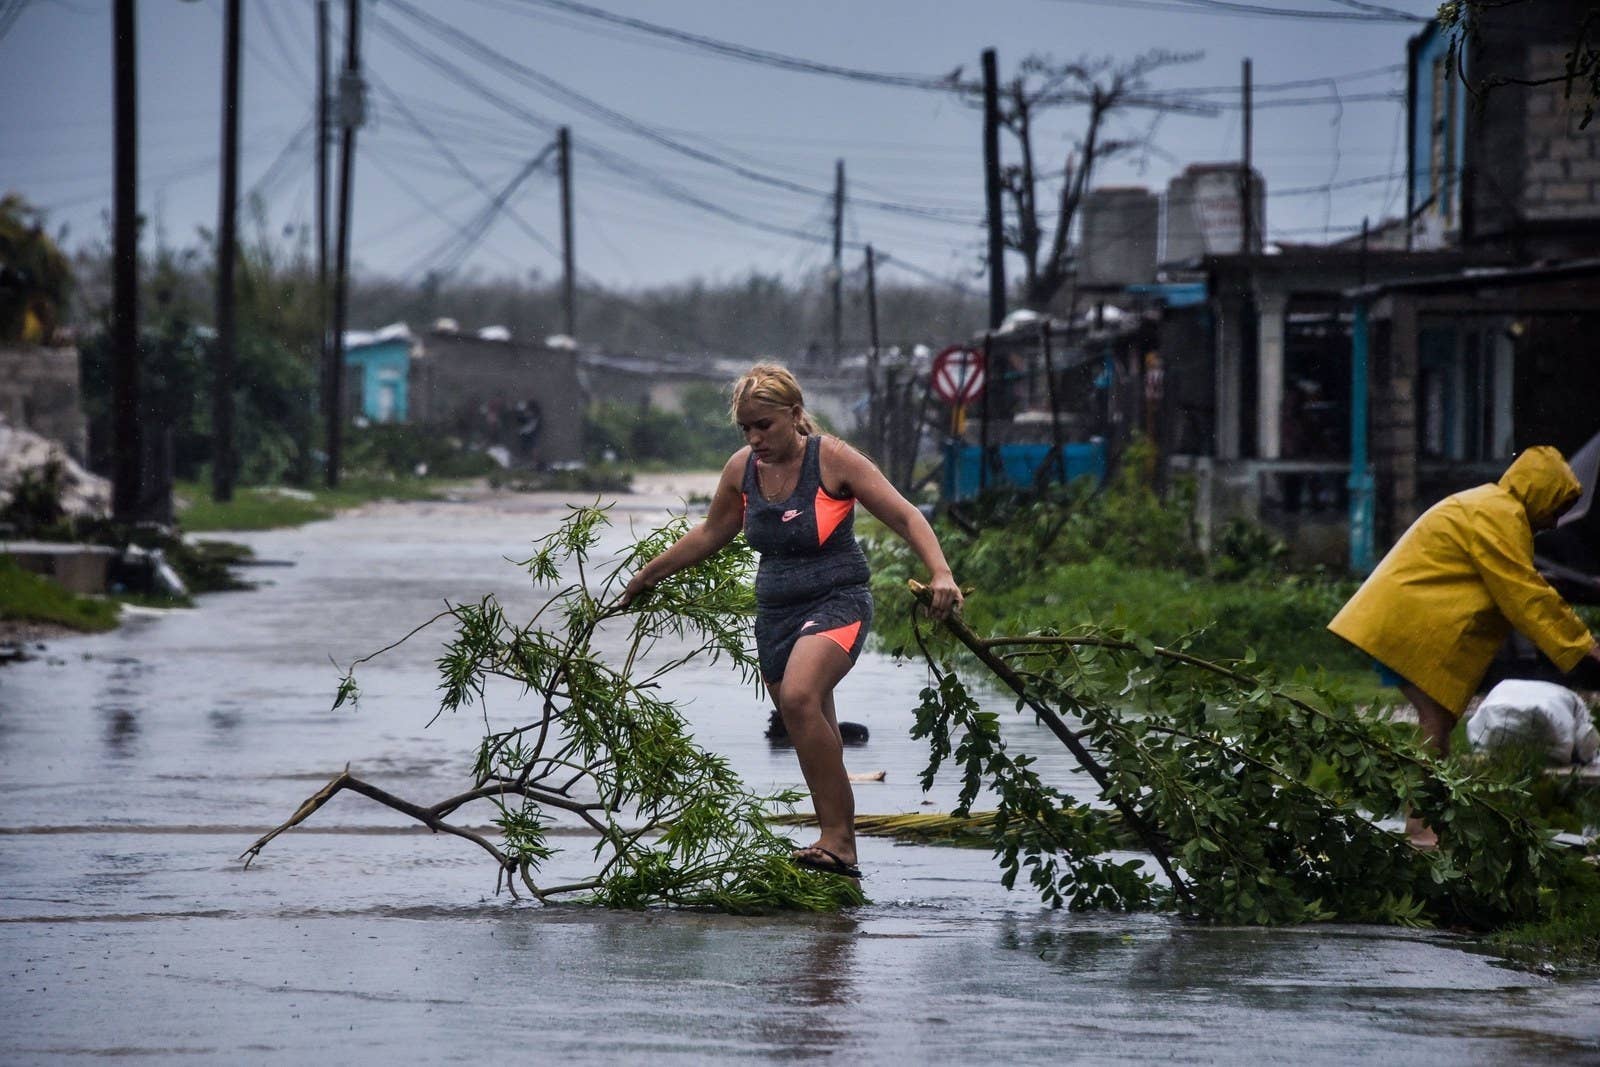 A woman clears downed branches following the storm.